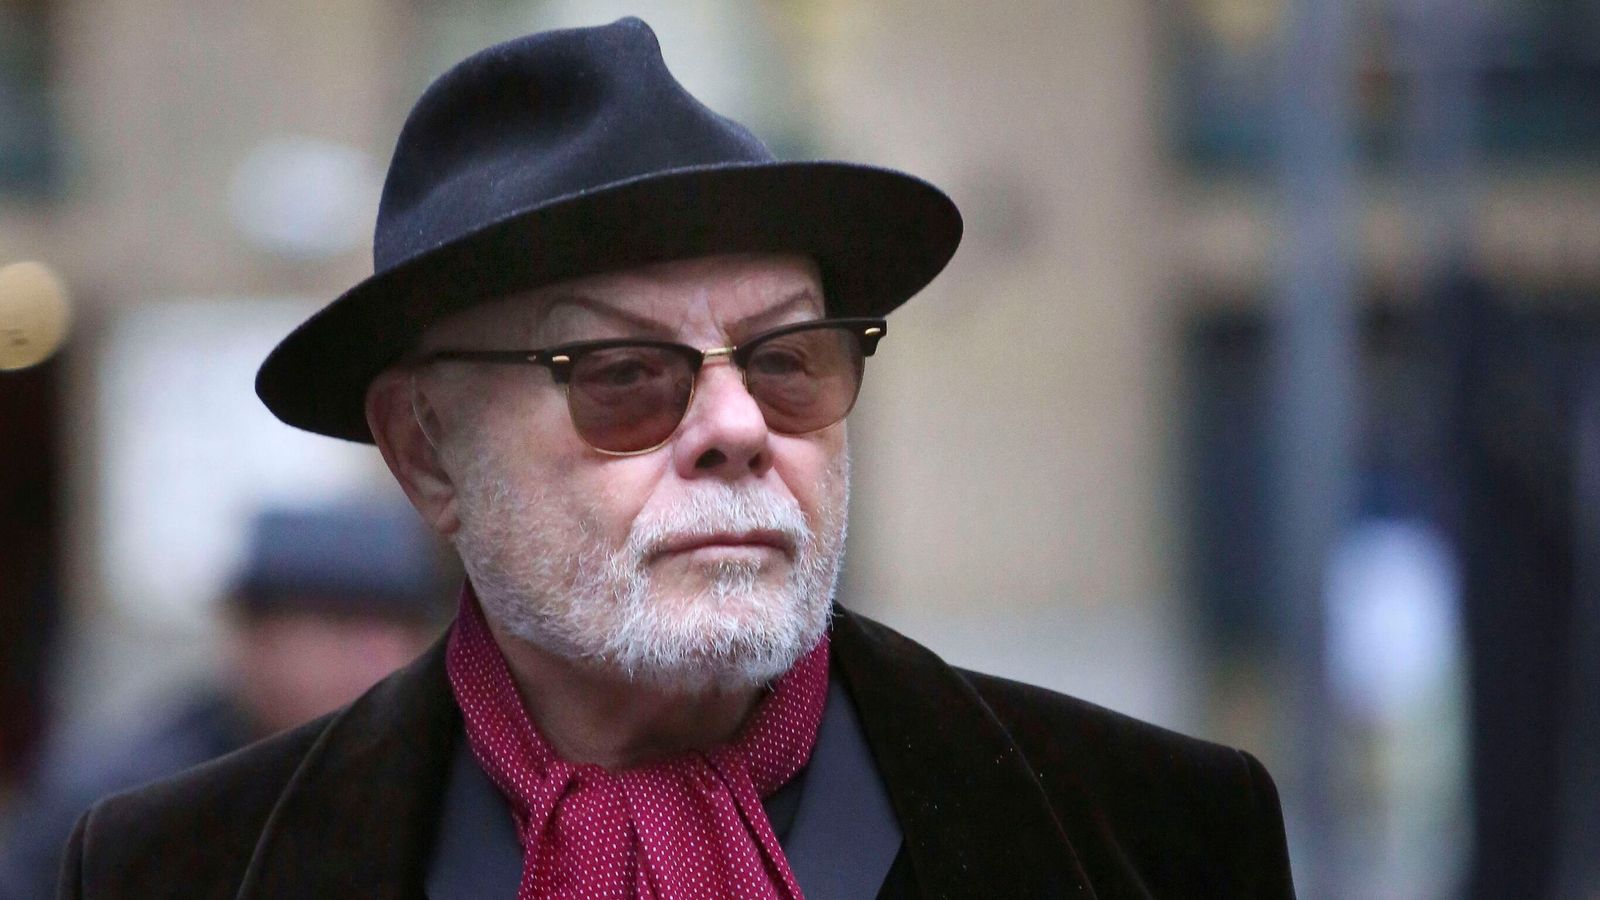 Gary Glitter recalled to jail one month after his release